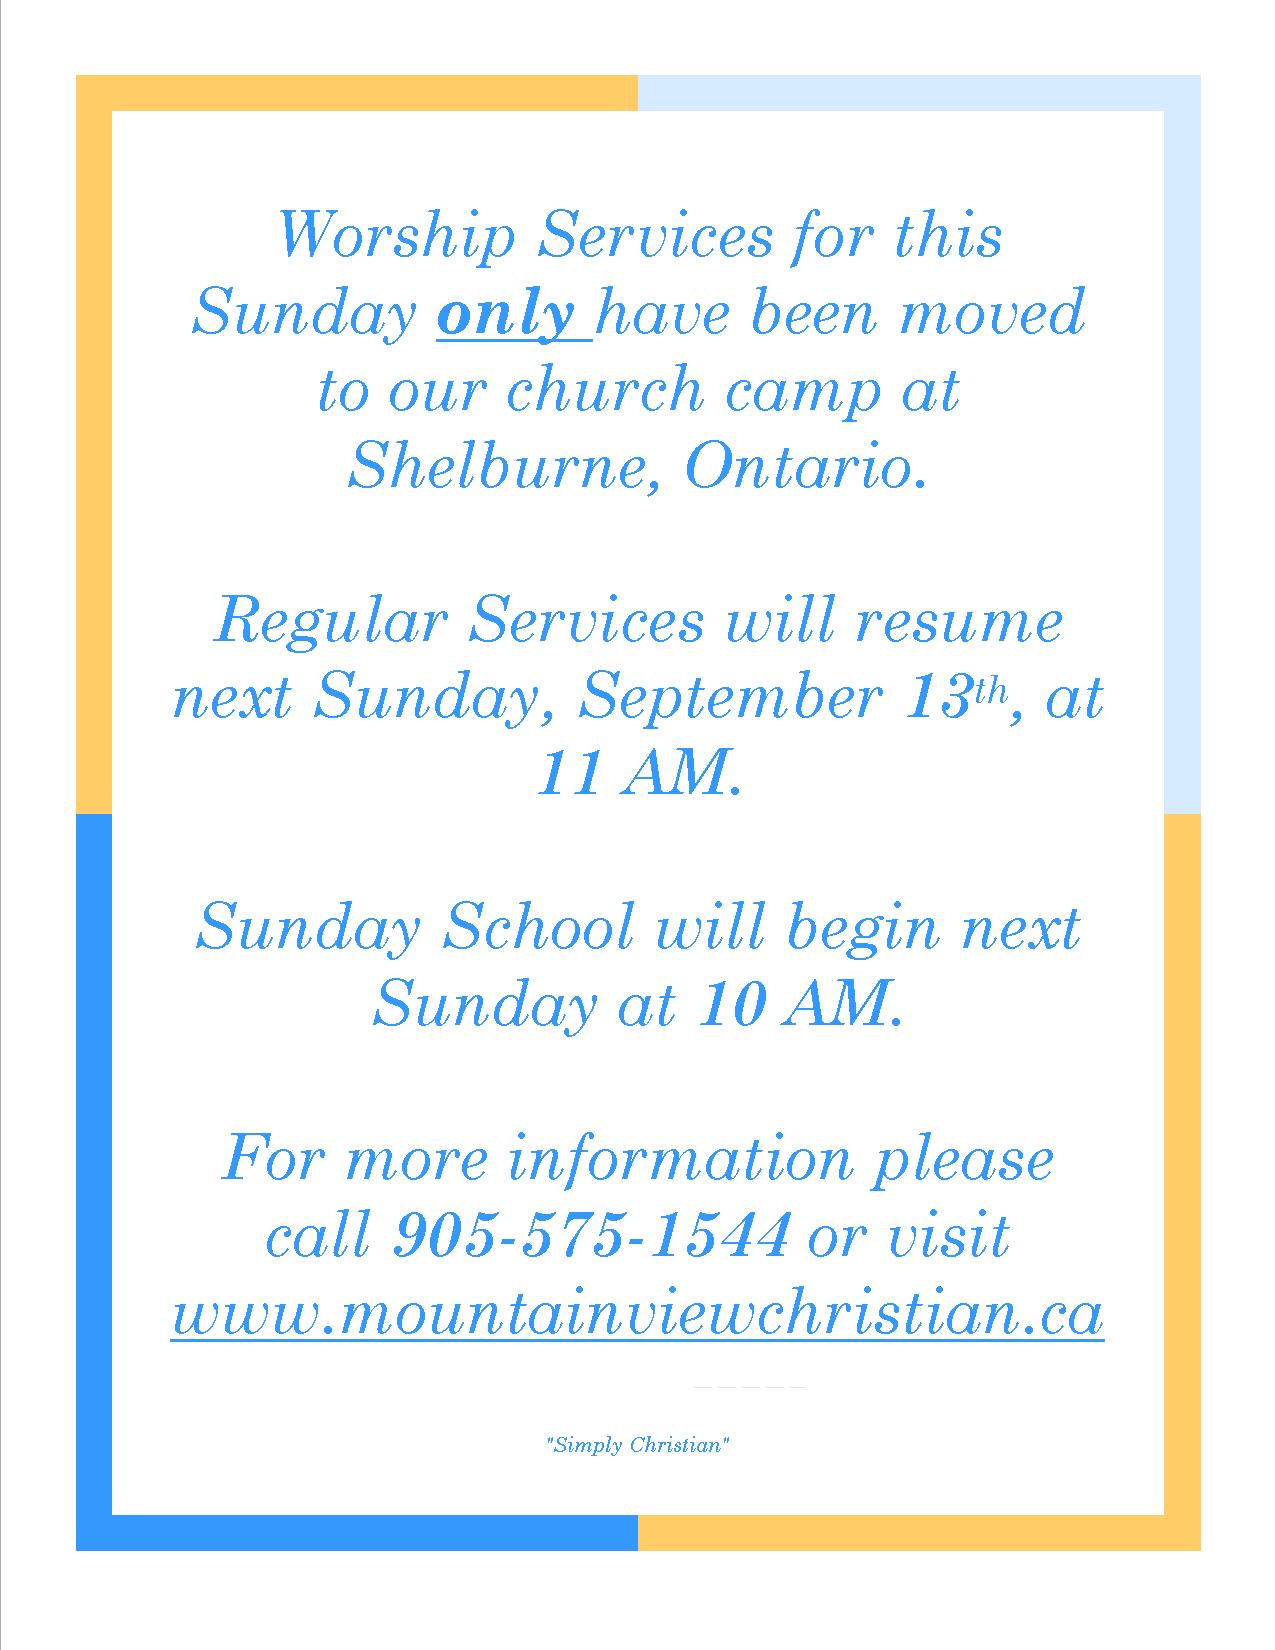 Church Cancellation sign for camp